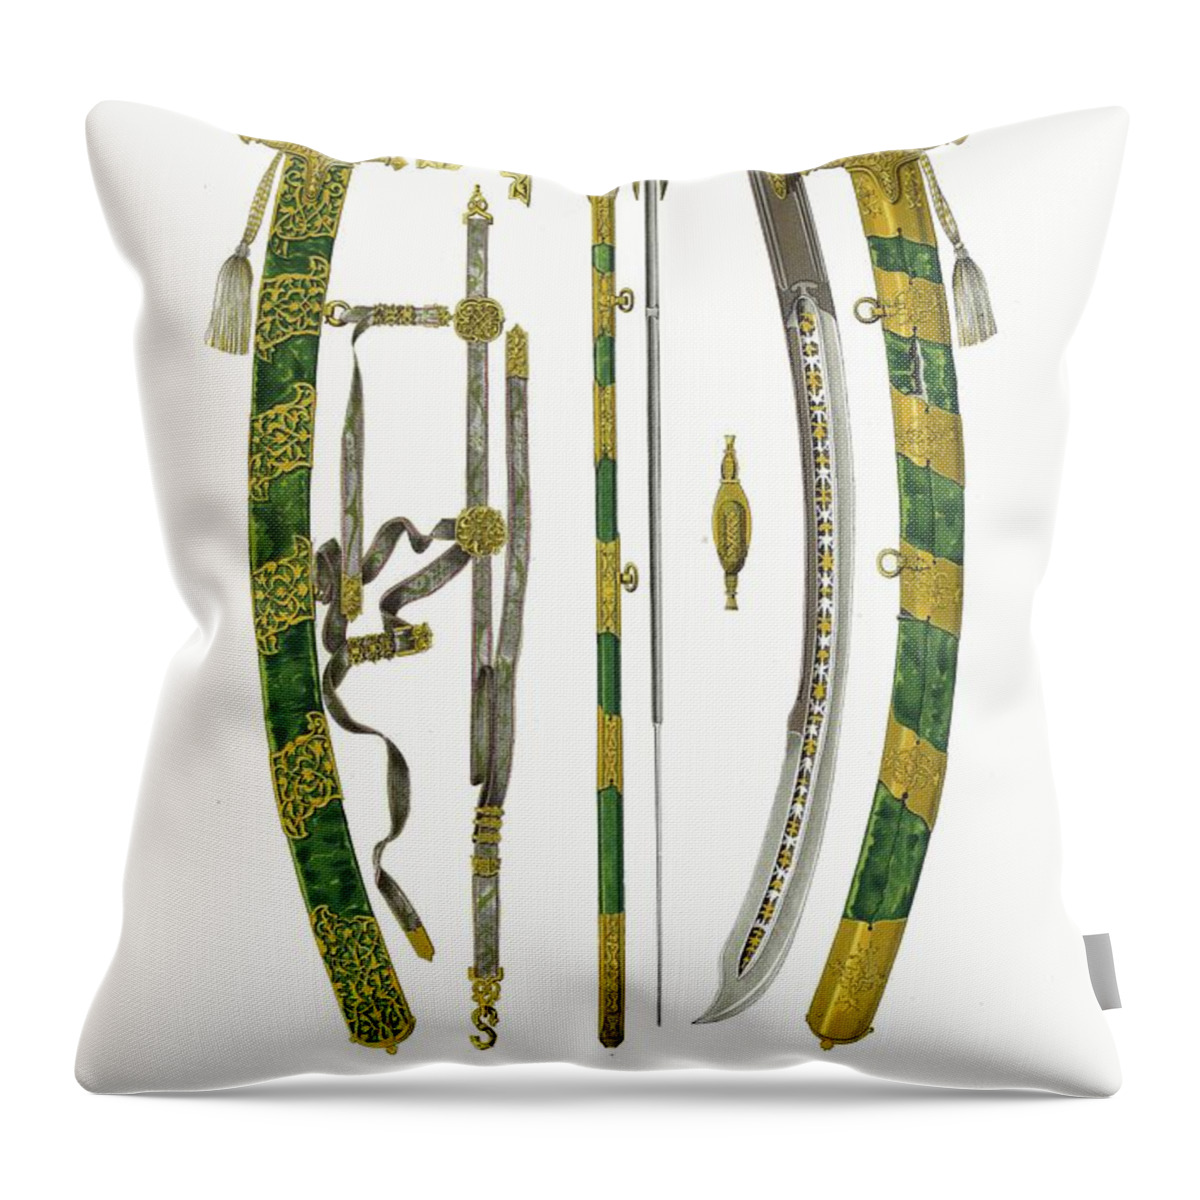 Weapons Throw Pillow featuring the painting Tesak Tsaria Alekseia Mikhailovicha by Fedor Grigoryevich Solntsev